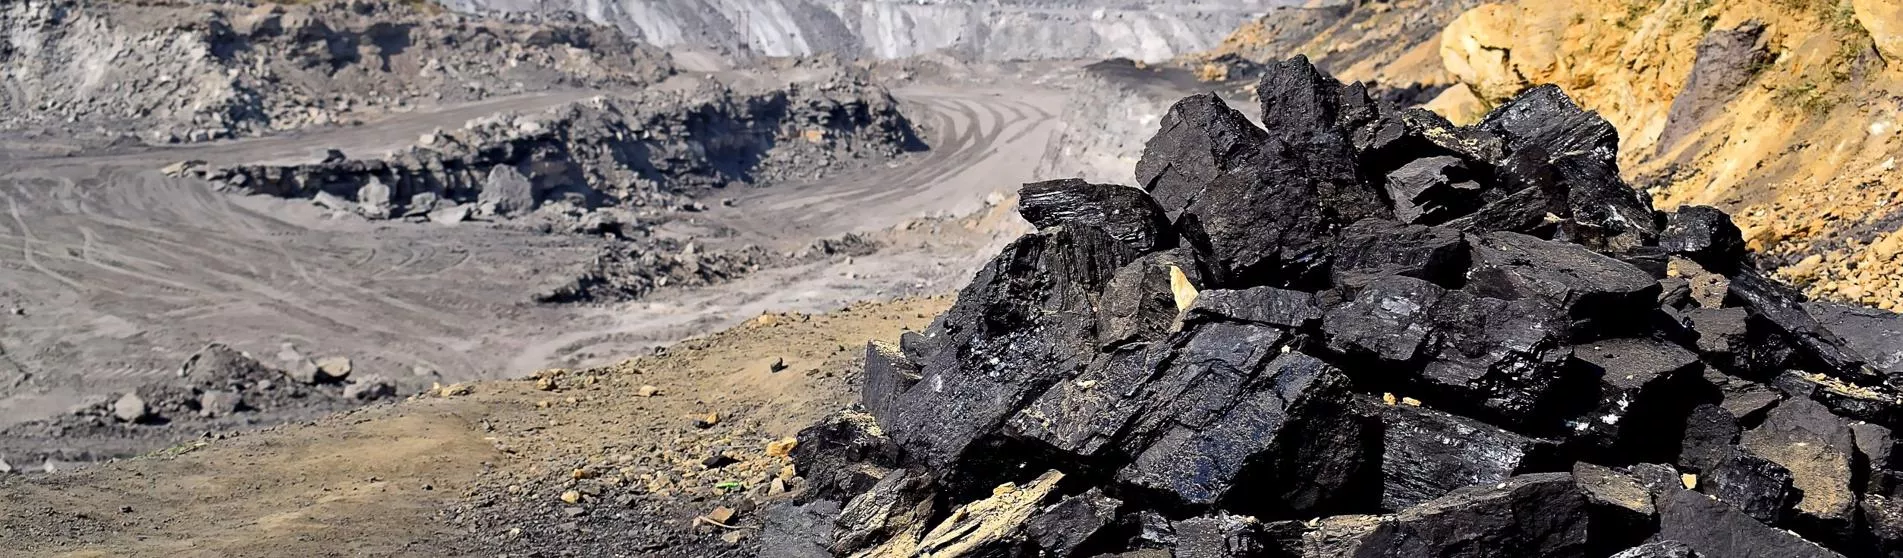 Coal mining project, West Bengal